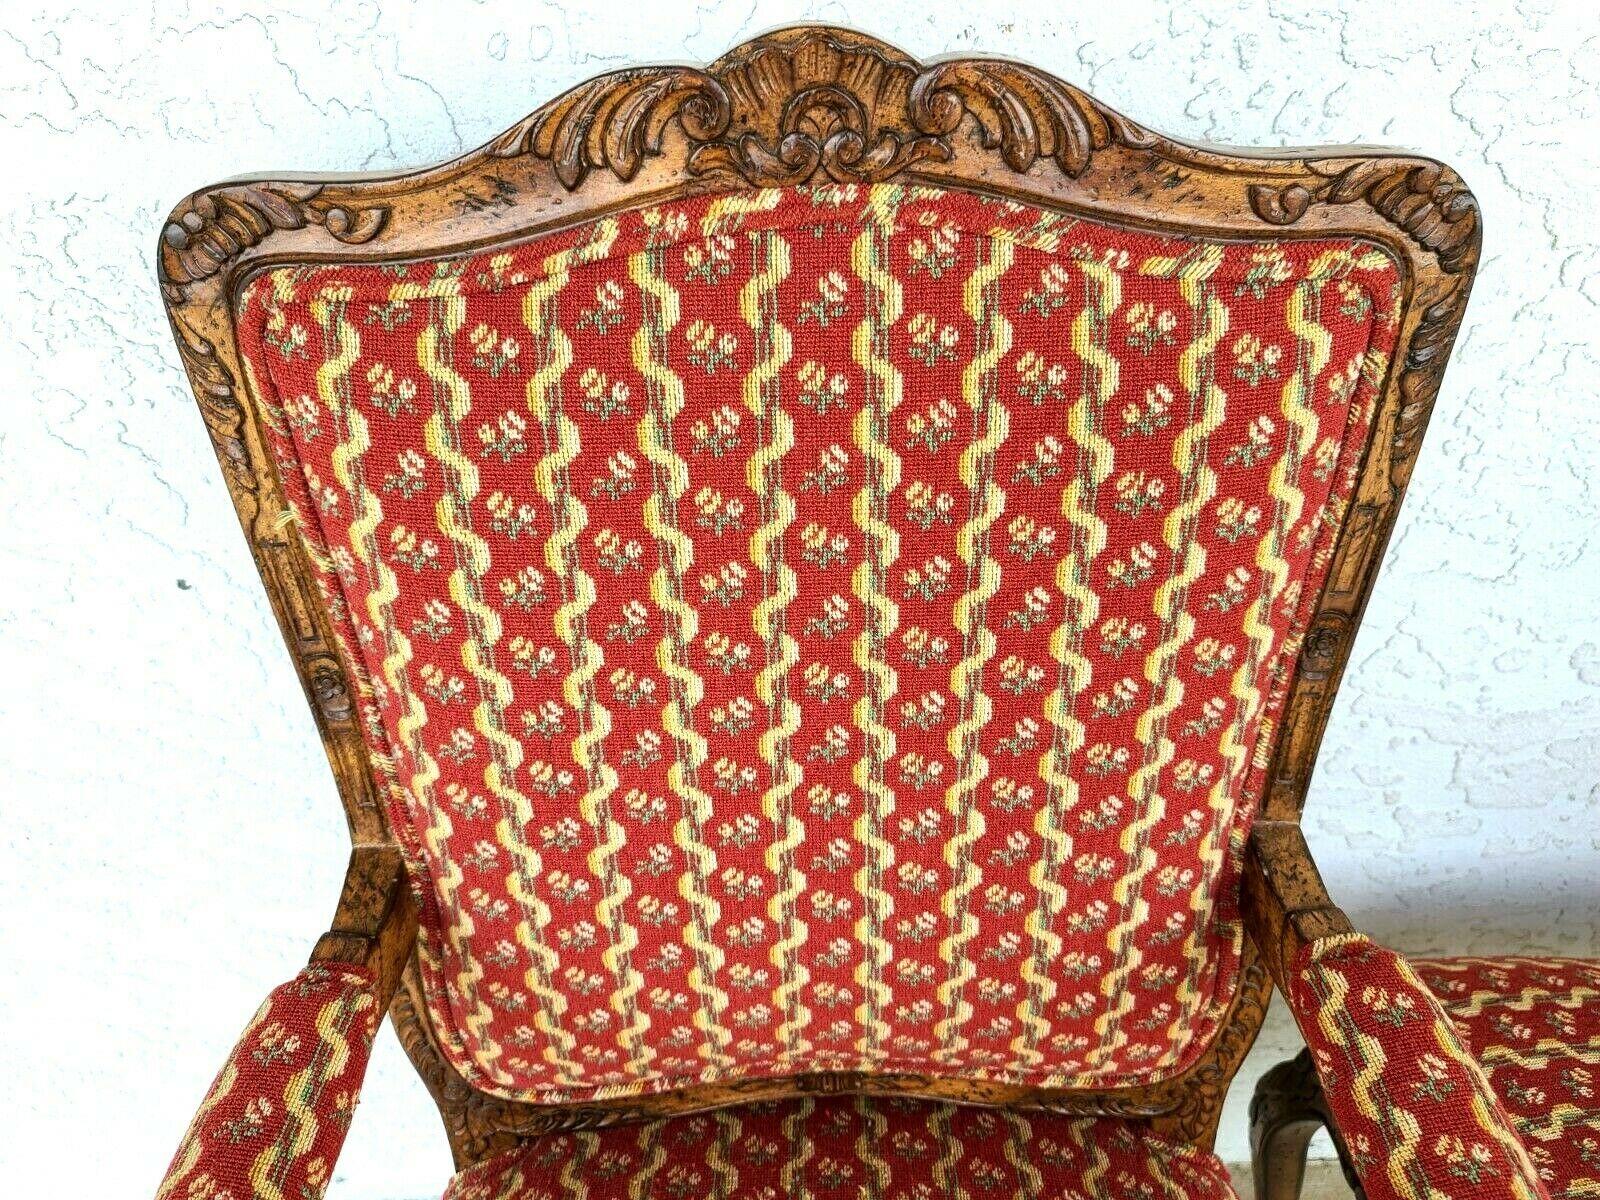 Vintage set of 4 Newly Upholstered French Provincial Louis XV Style solid wood dining chairs

Set includes 2 arm and 2 side chairs featuring a vibrant, subtle floral patterned cotton fabric and spring supported seats.

Approximate Measurements